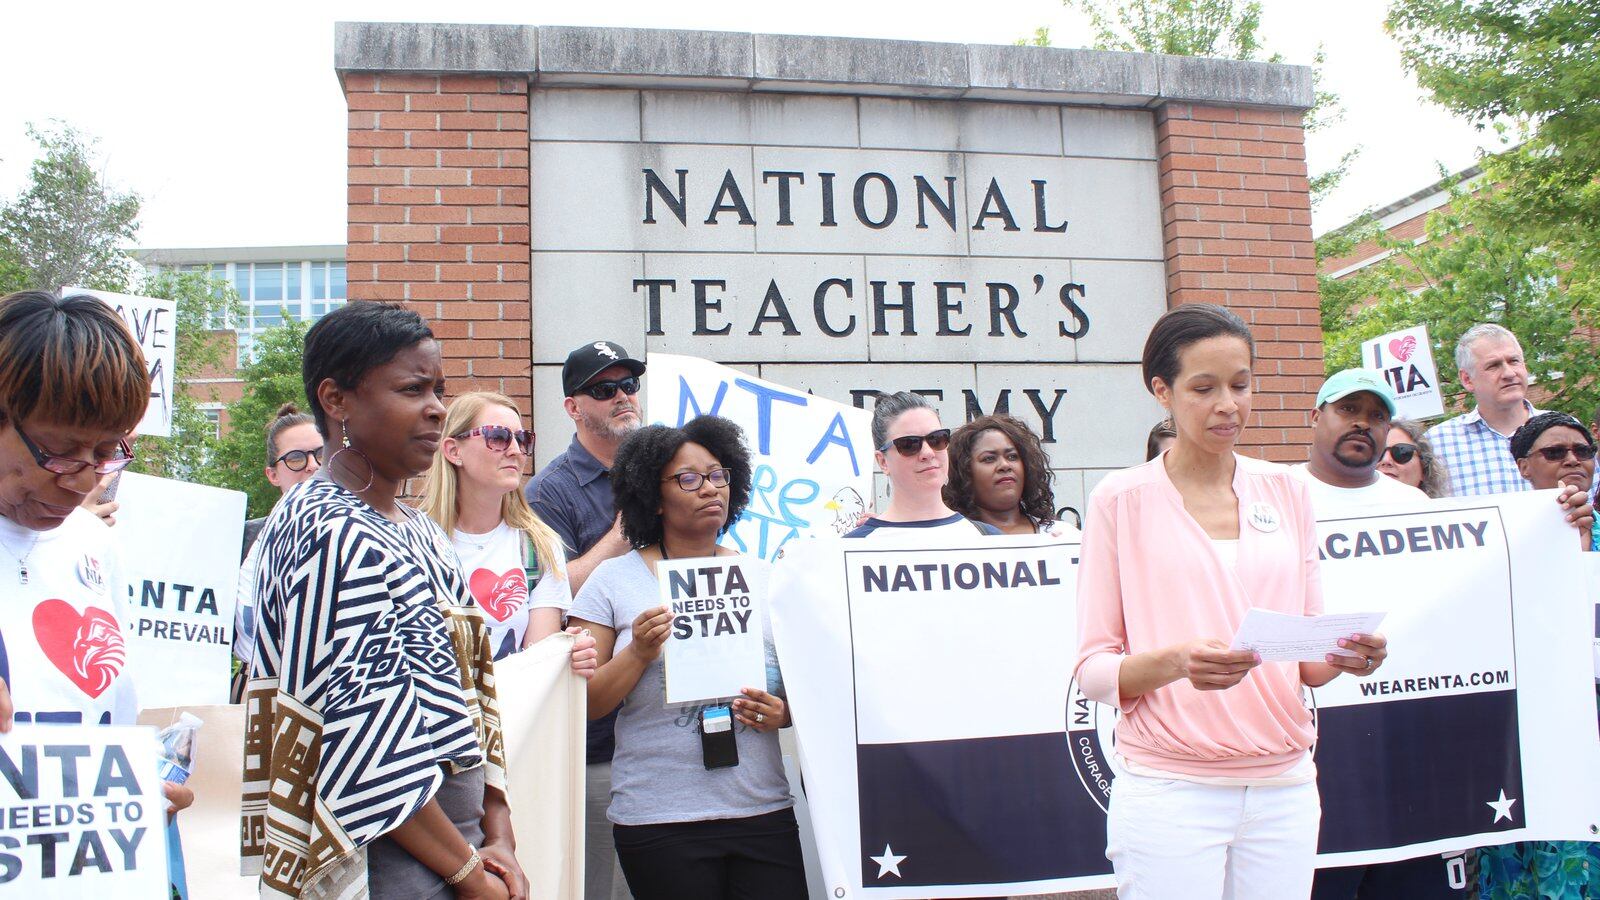 Elisabeth Greer, a parent and leader at the National Teachers Academy, speaking at a press conference in June about parents' lawsuit to stop CPS from displacing NTA with a new high school.